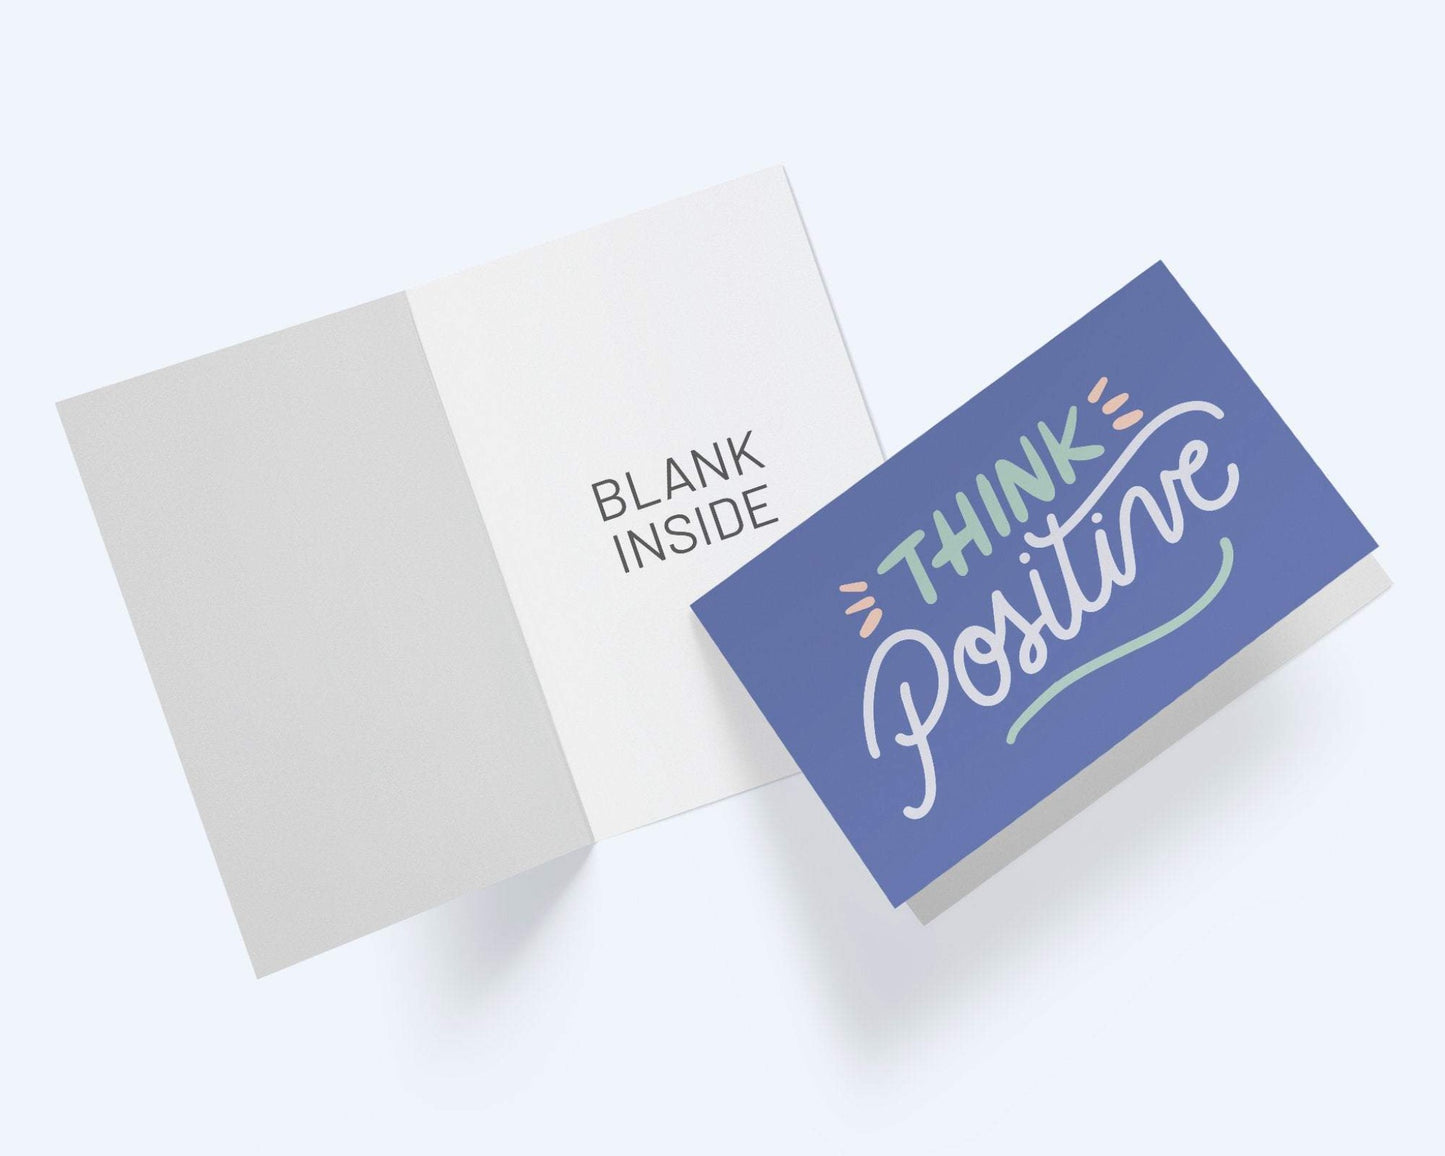 Think Positive: Encouragement Greeting Card.